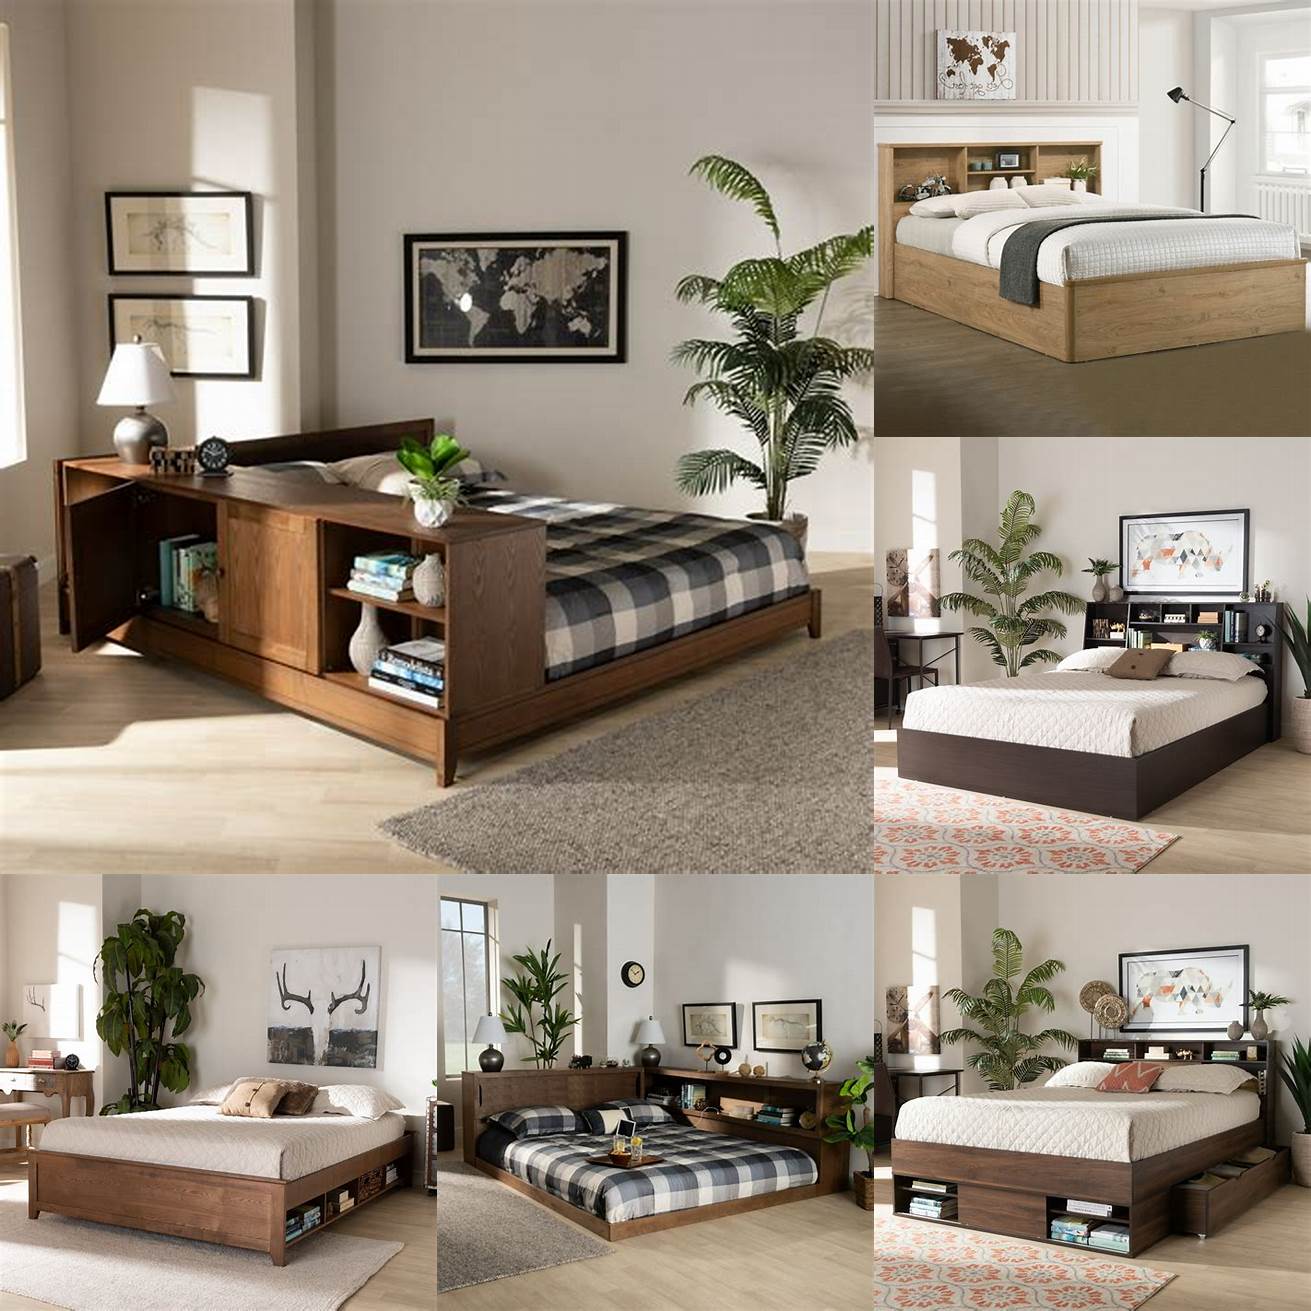 A low platform bed with a built-in headboard shelf